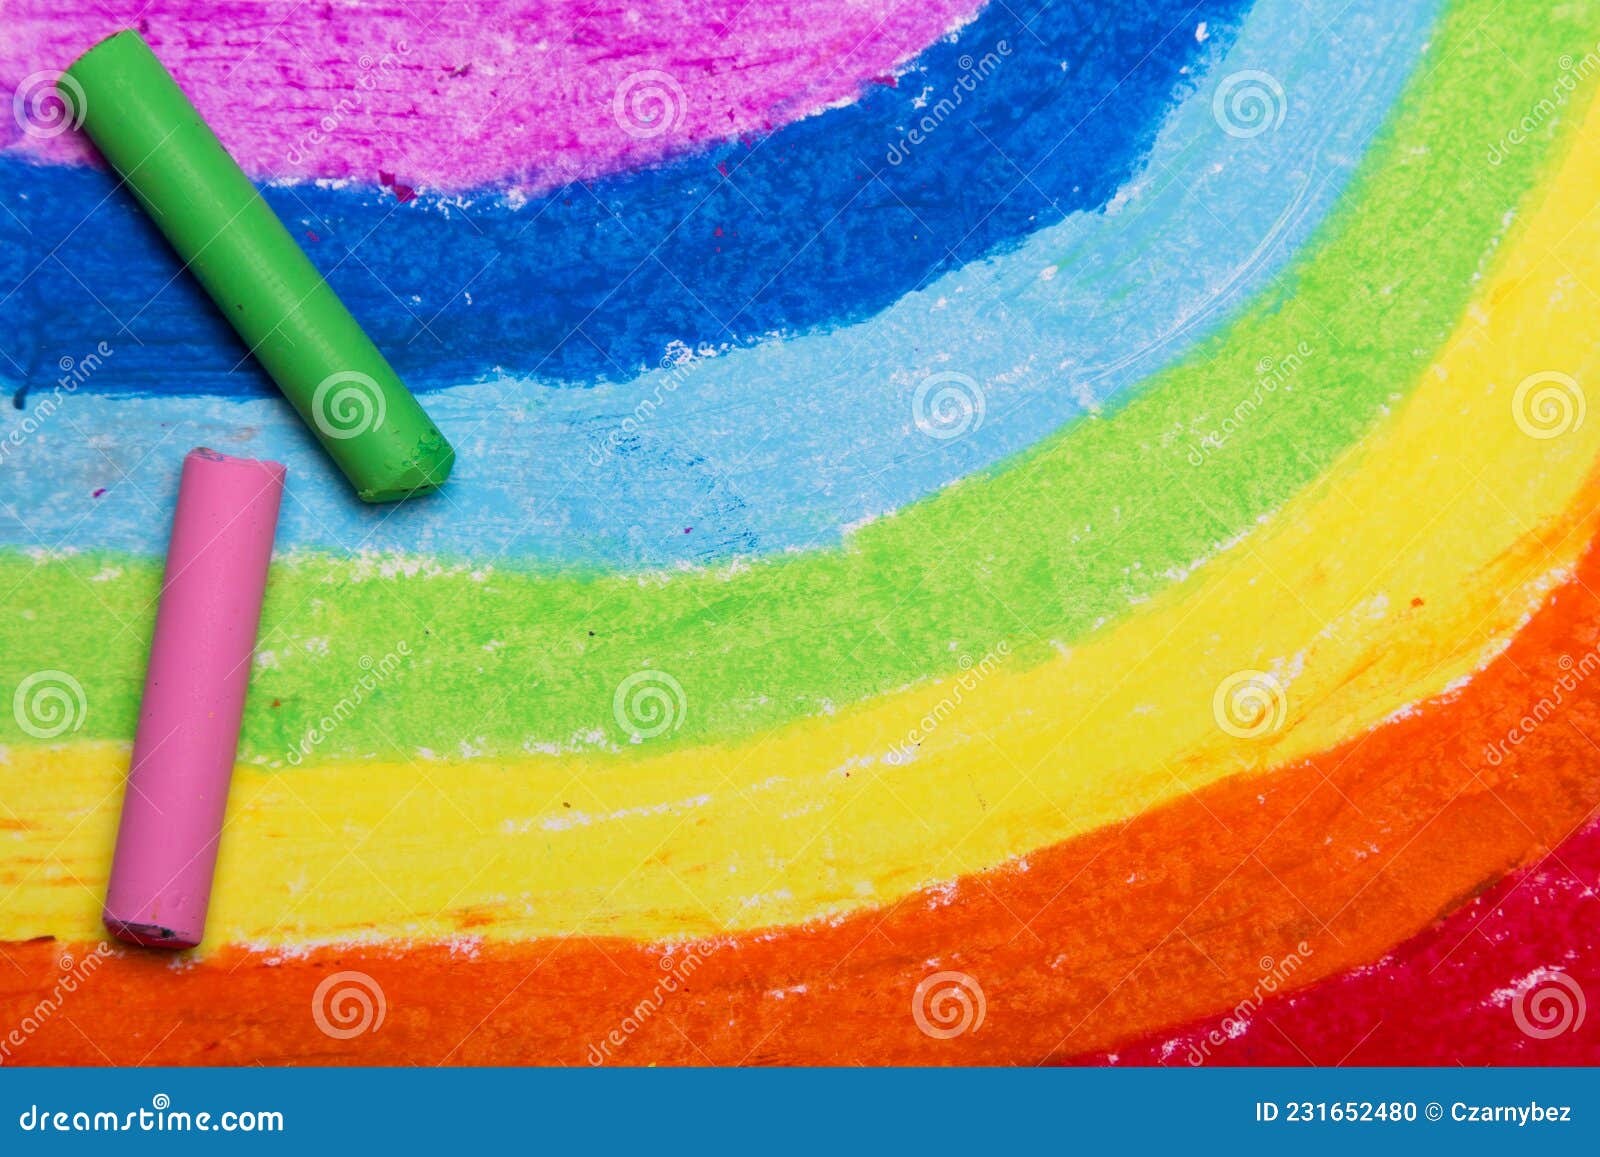 Closeup Of Oil Pastel Crayons And A Drawn Rainbow Stock Photo